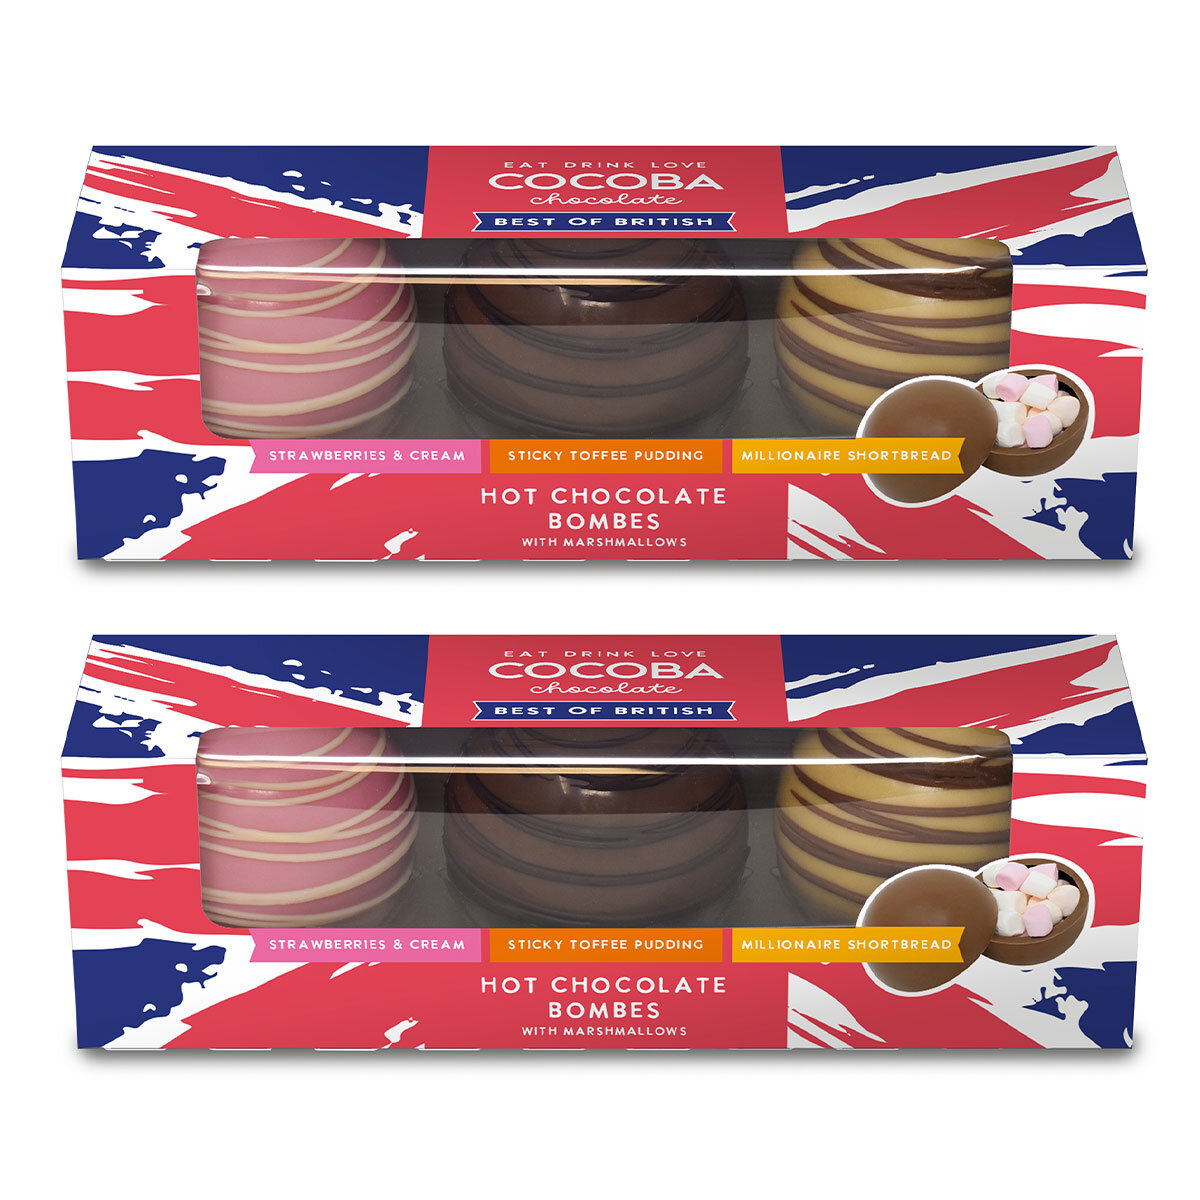 Cocoba Best Of British Hot Chocolate Bombes, 3 Pack x 2